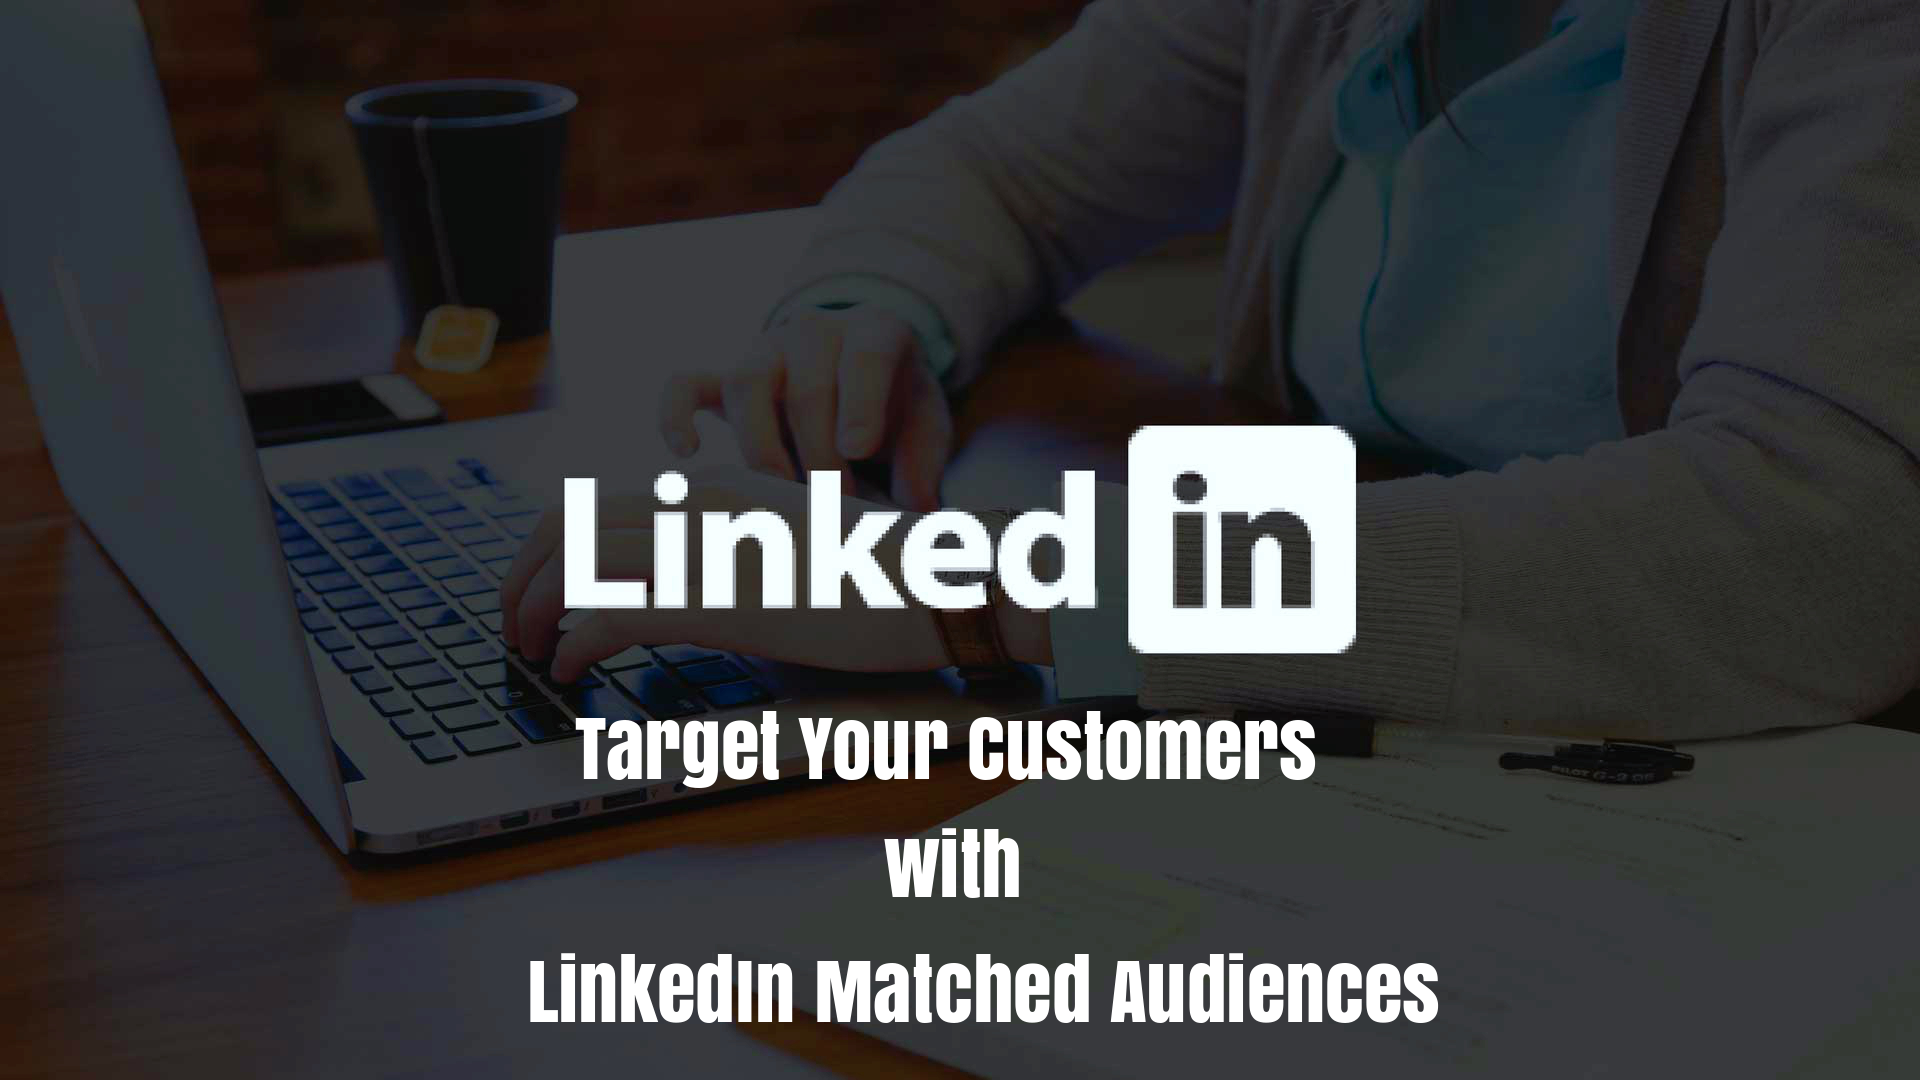 LinkedIn Matched Audiences - A Feature that Help Advertisers Reach their Target Audiences